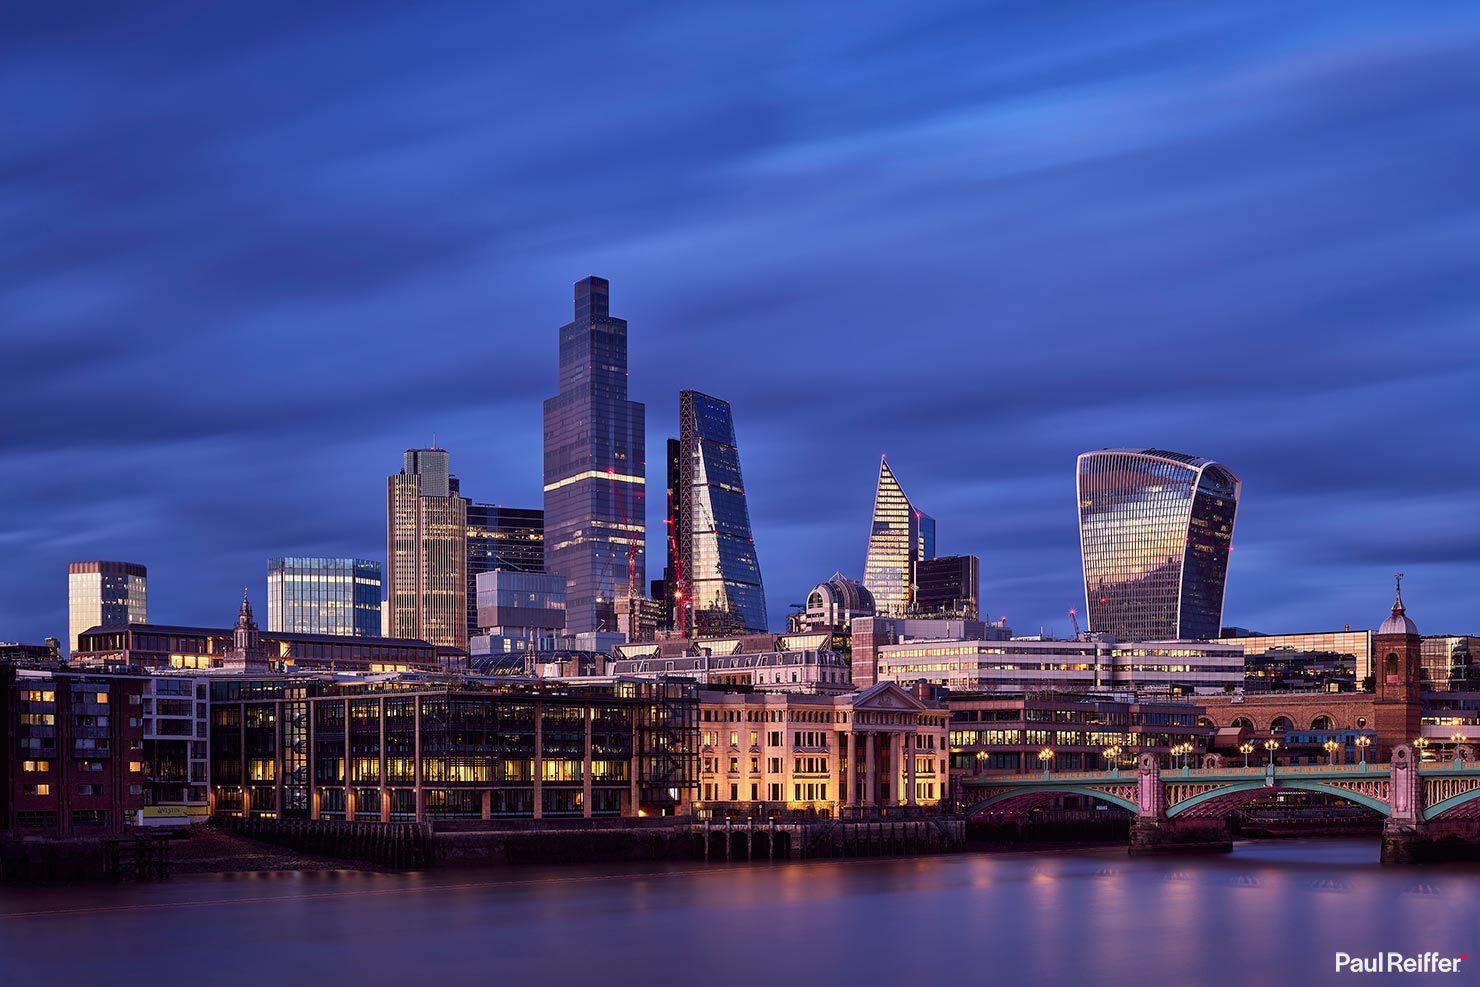 London The City Leadenhall Street Building Skyscraper Cheesegrater Walkie Talkie England Britain Capital Blue Hour River Thames Bridge Station Paul Reiffer Photography Lights Cityscape